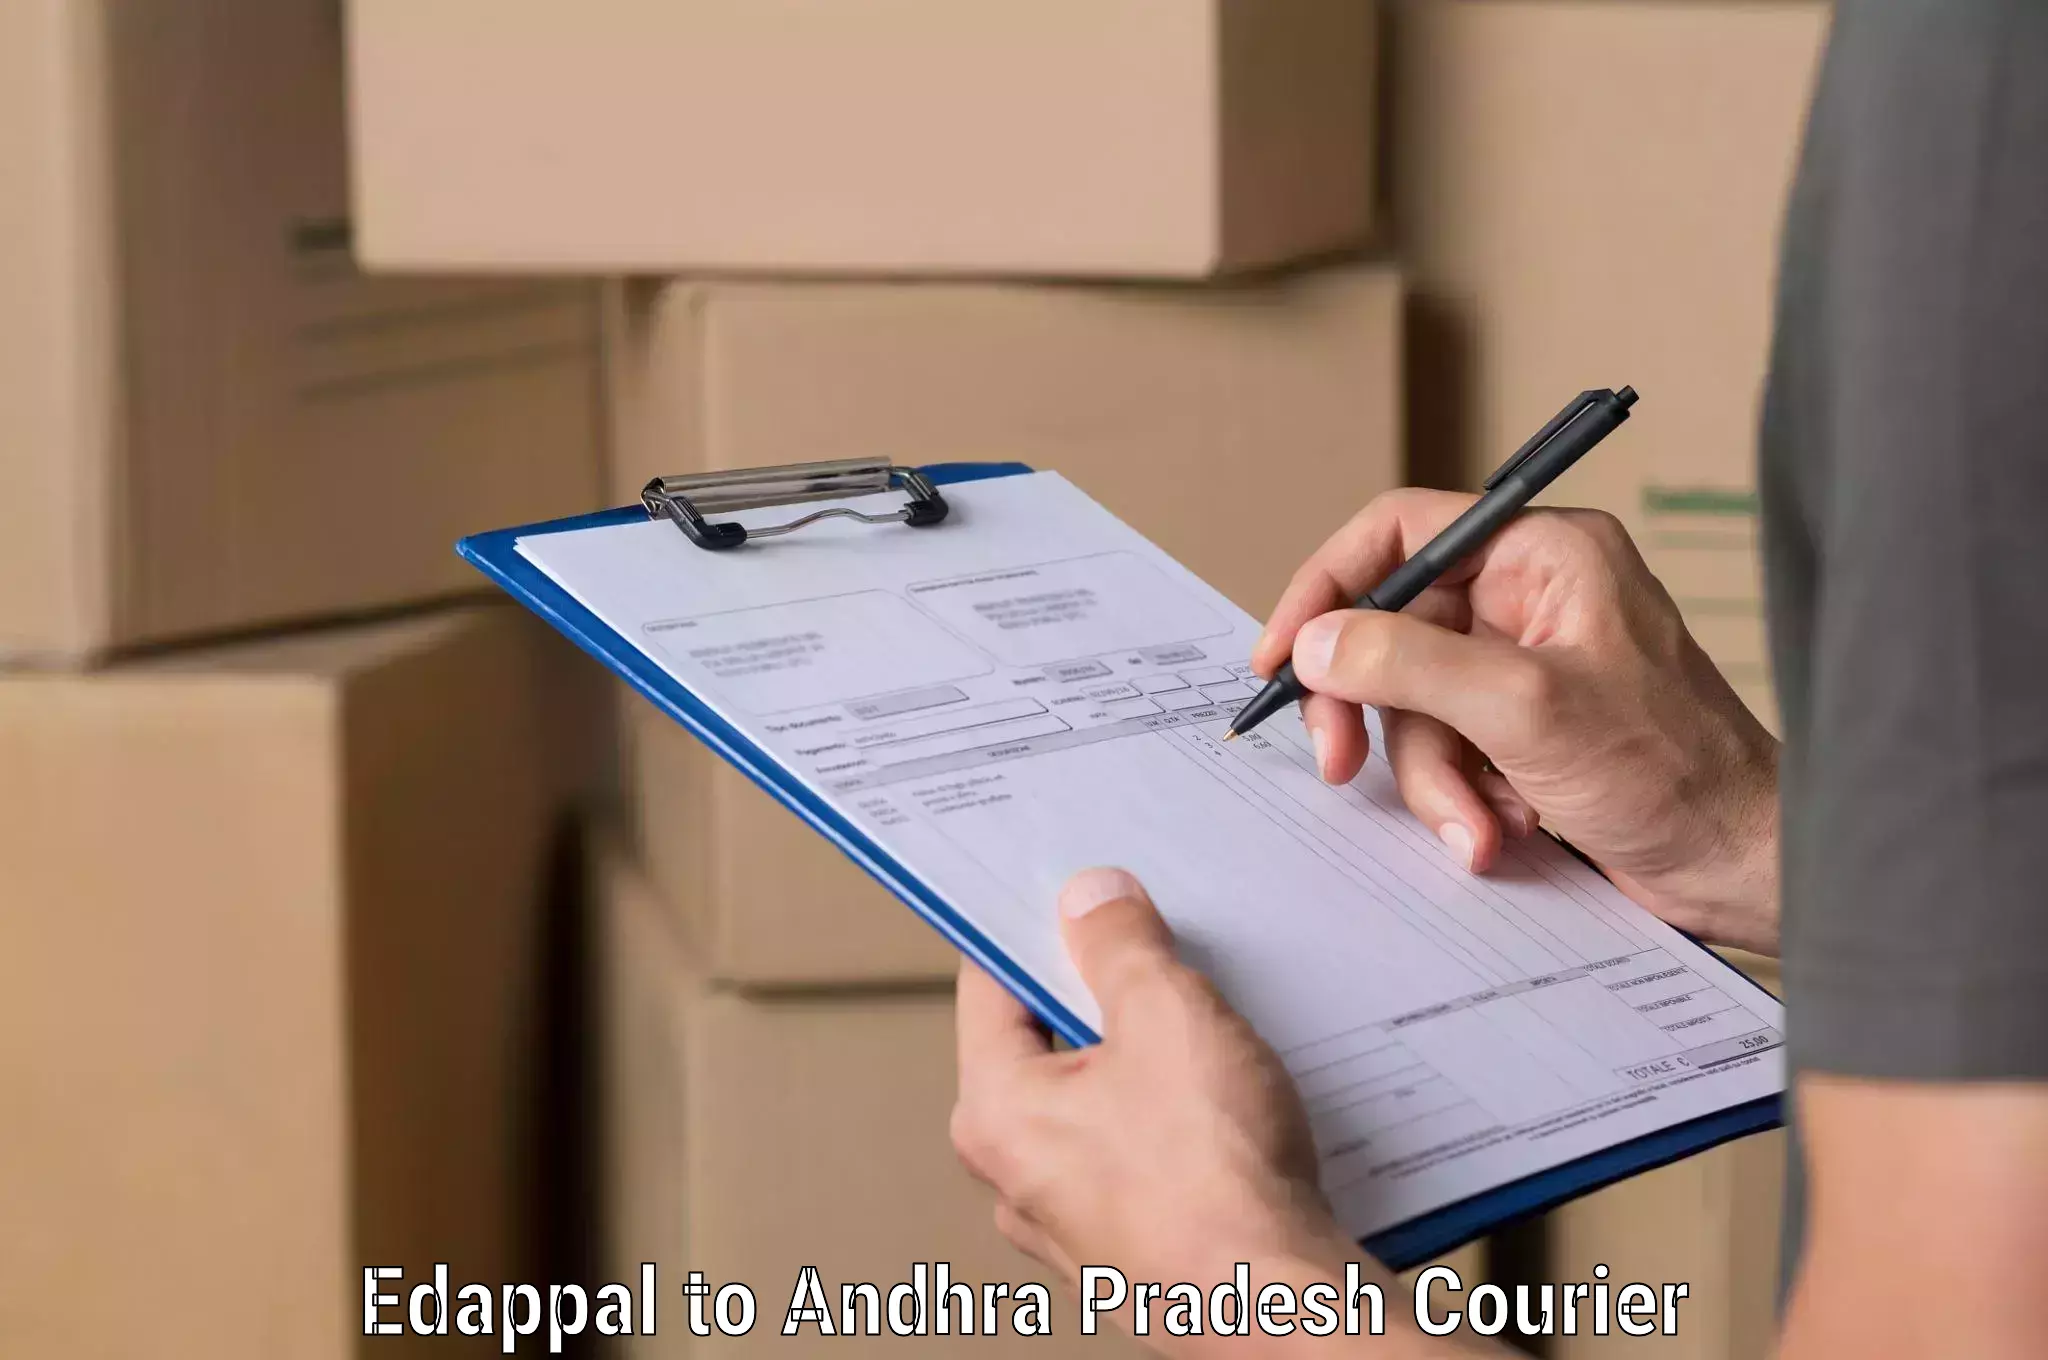 Large-scale shipping solutions Edappal to Visakhapatnam Port